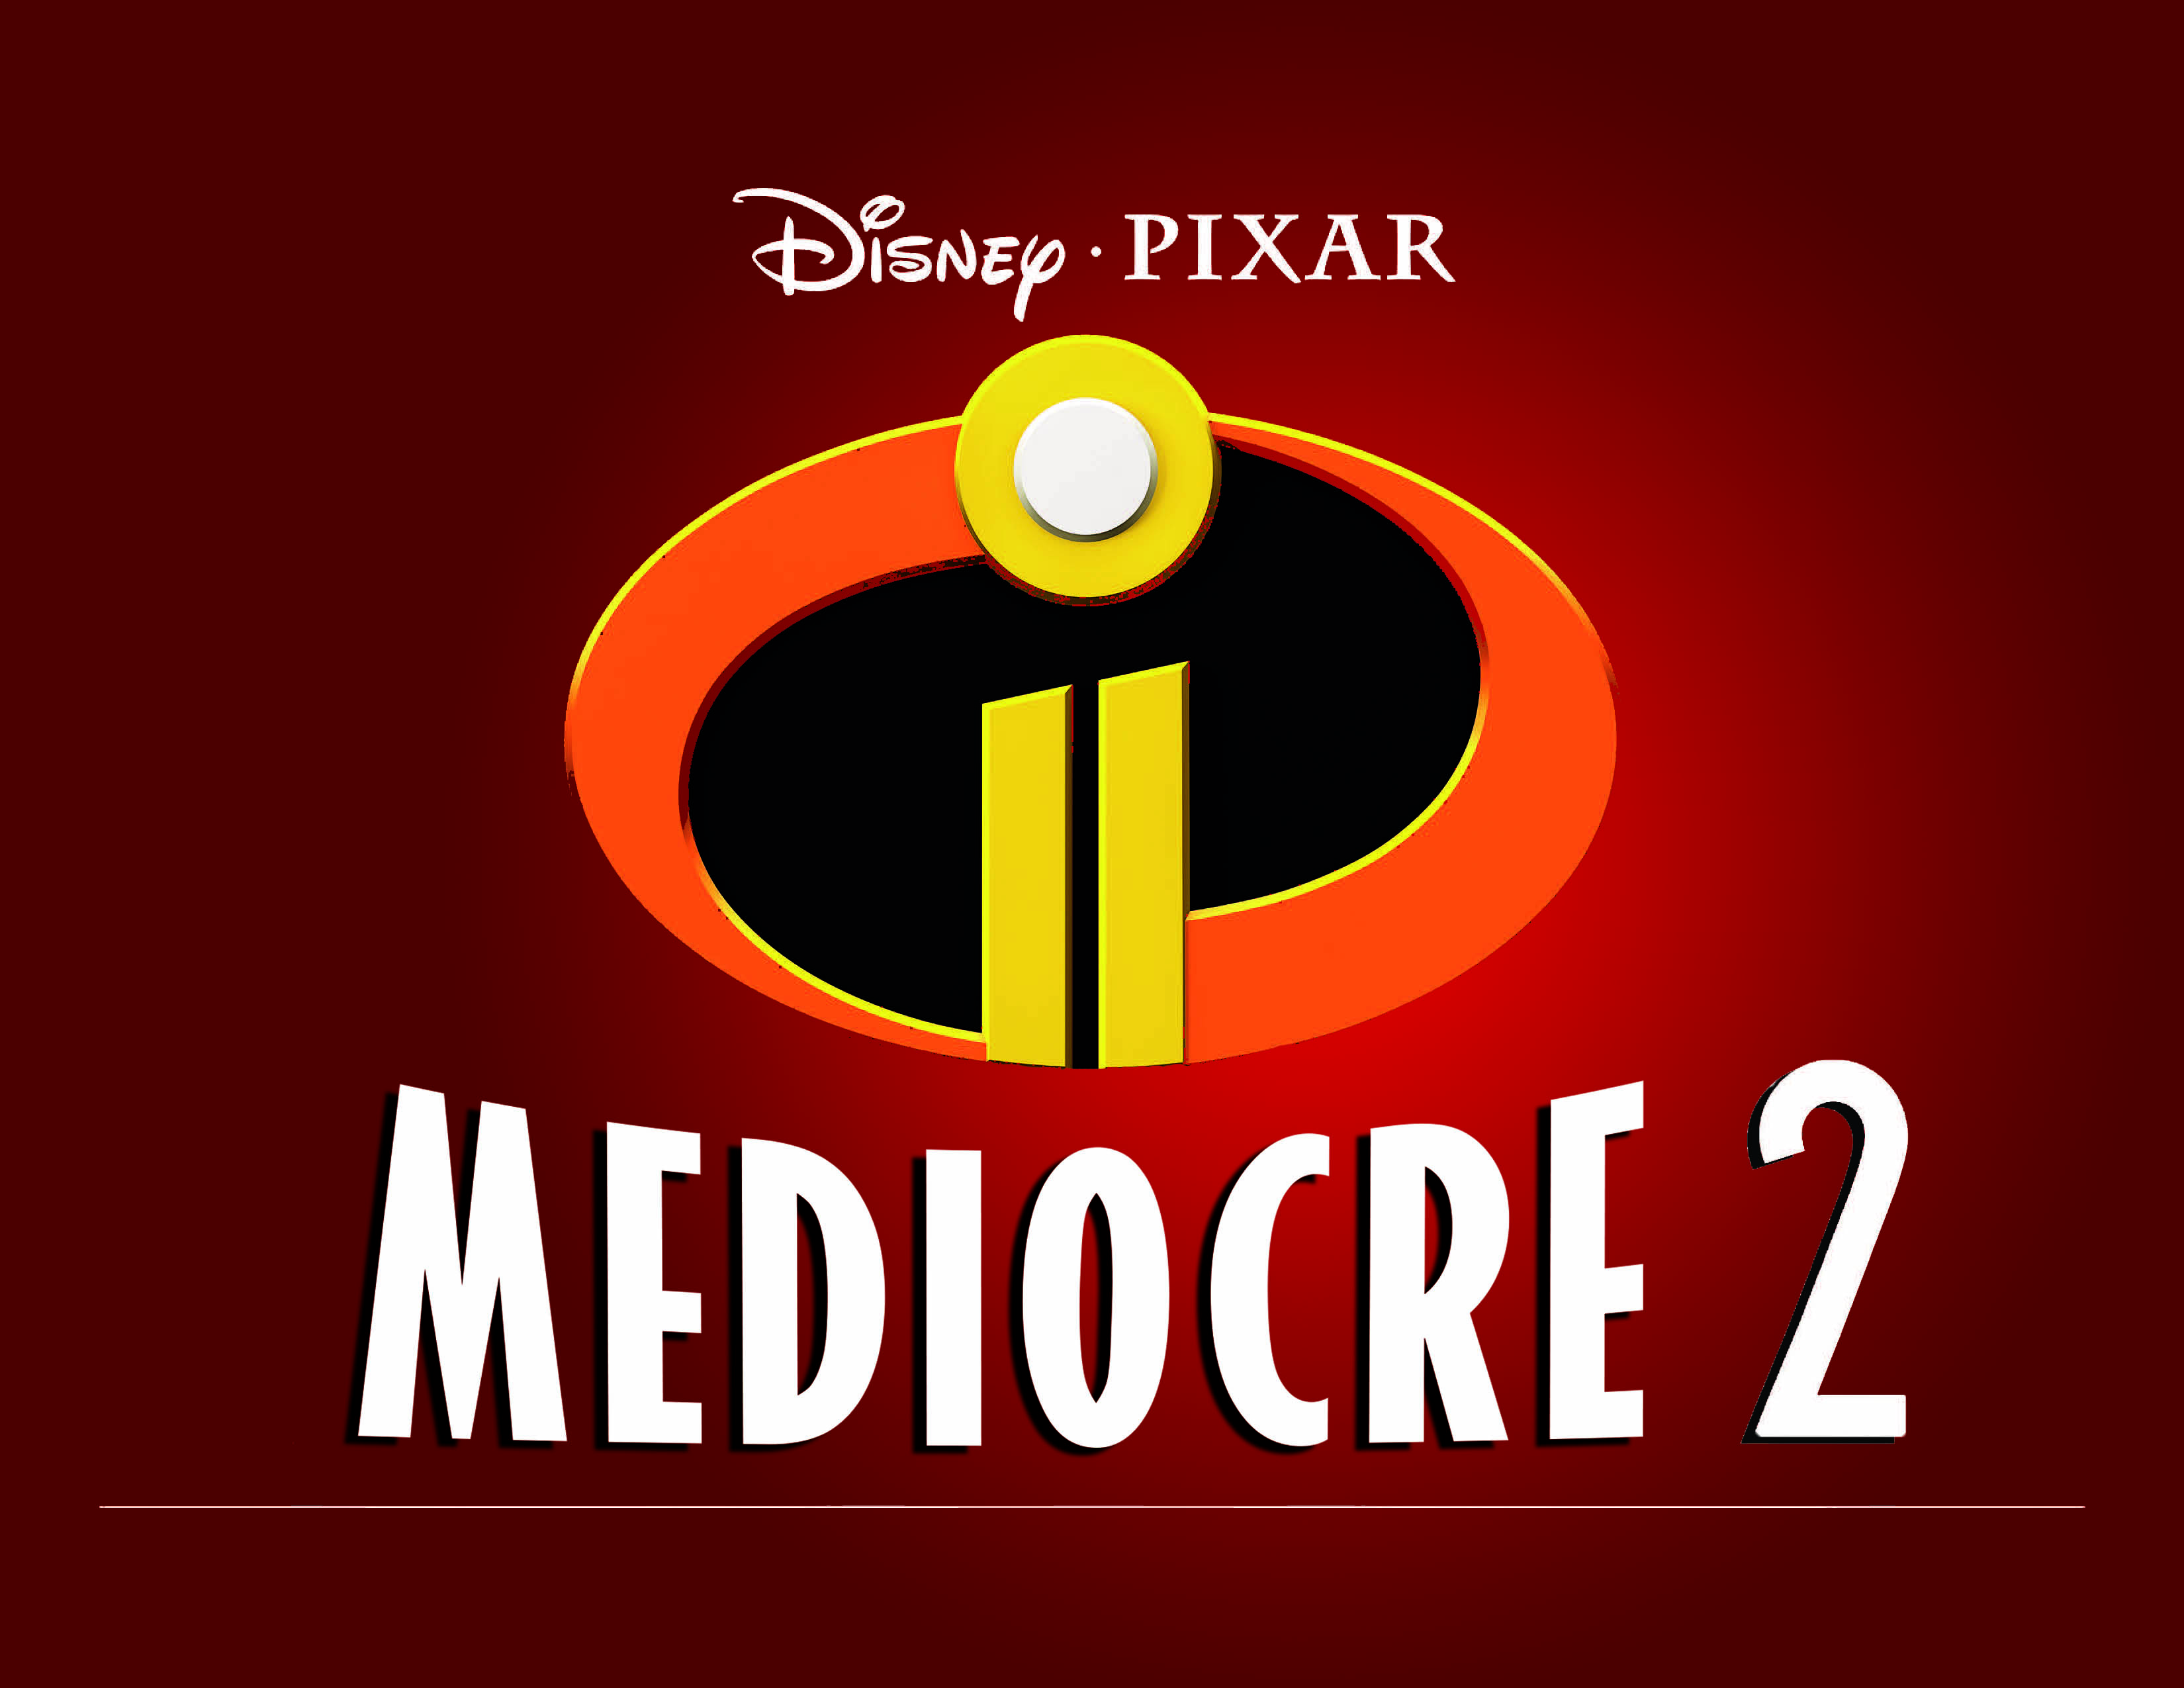 Incredible the Pixar Logo - Unspectaculars 2: A Review of “Incredibles 2”